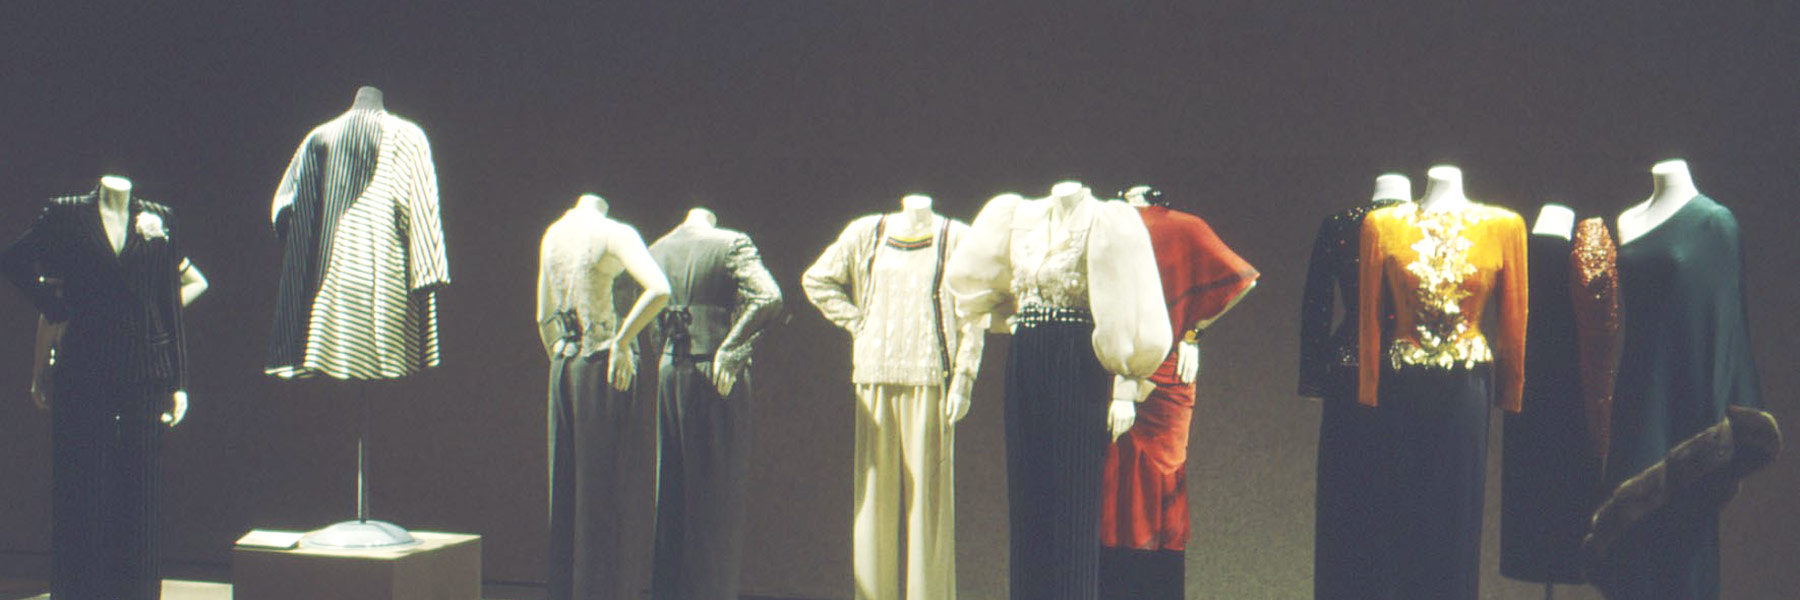 Mannequins wearing clothing.